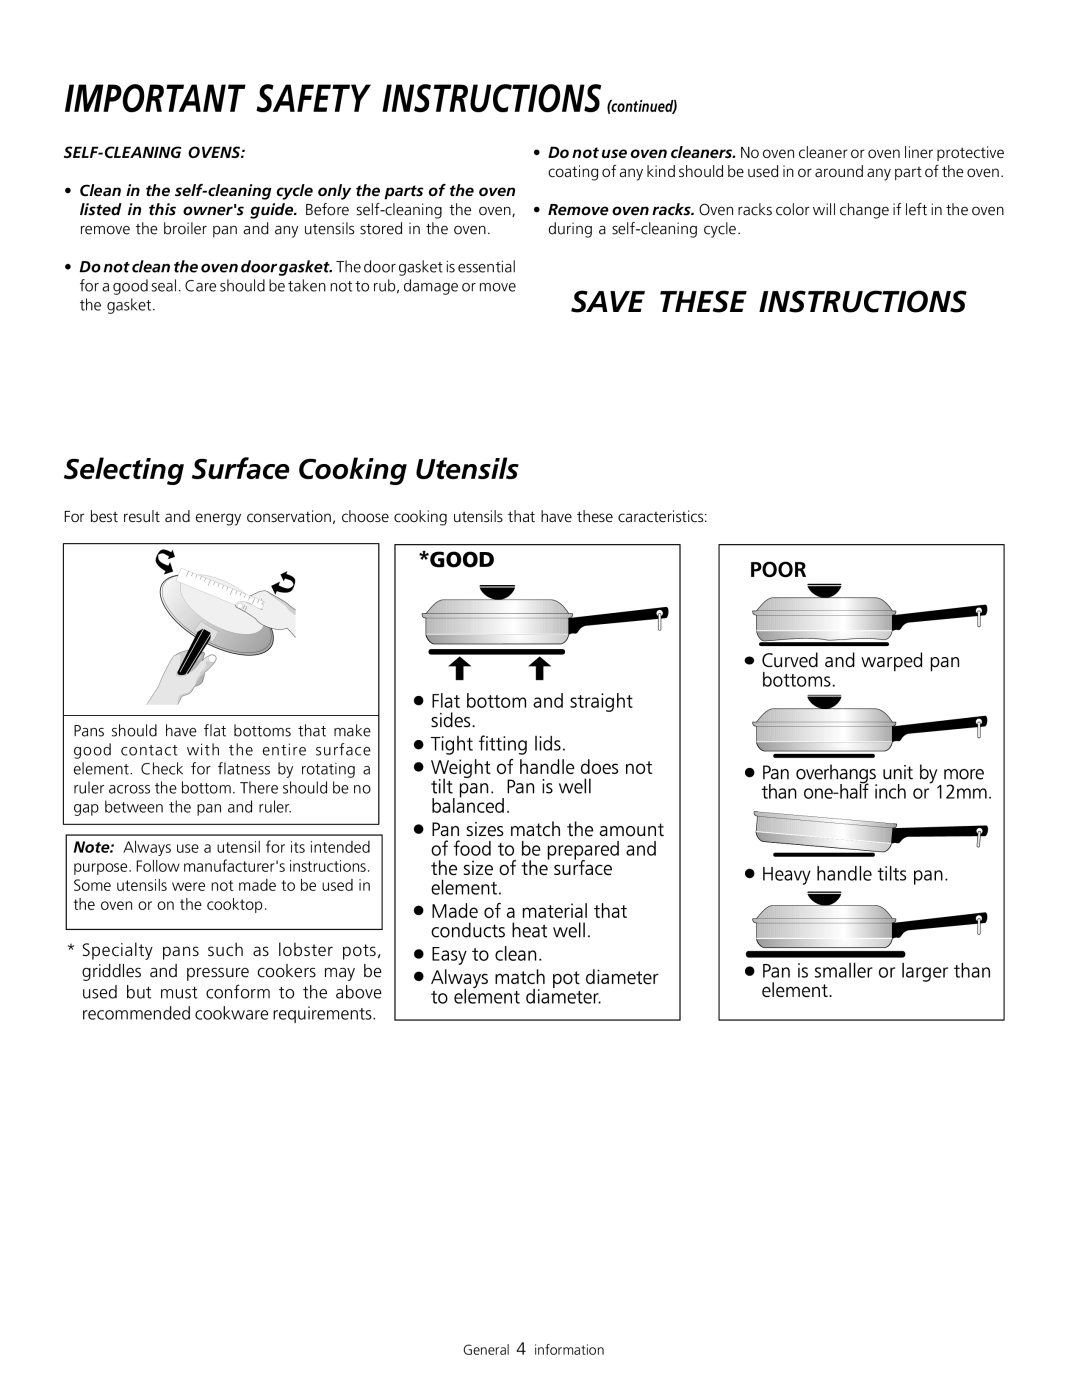 Frigidaire 318200805 IMPORTANT SAFETY INSTRUCTIONS continued, Save These Instructions, Selecting Surface Cooking Utensils 